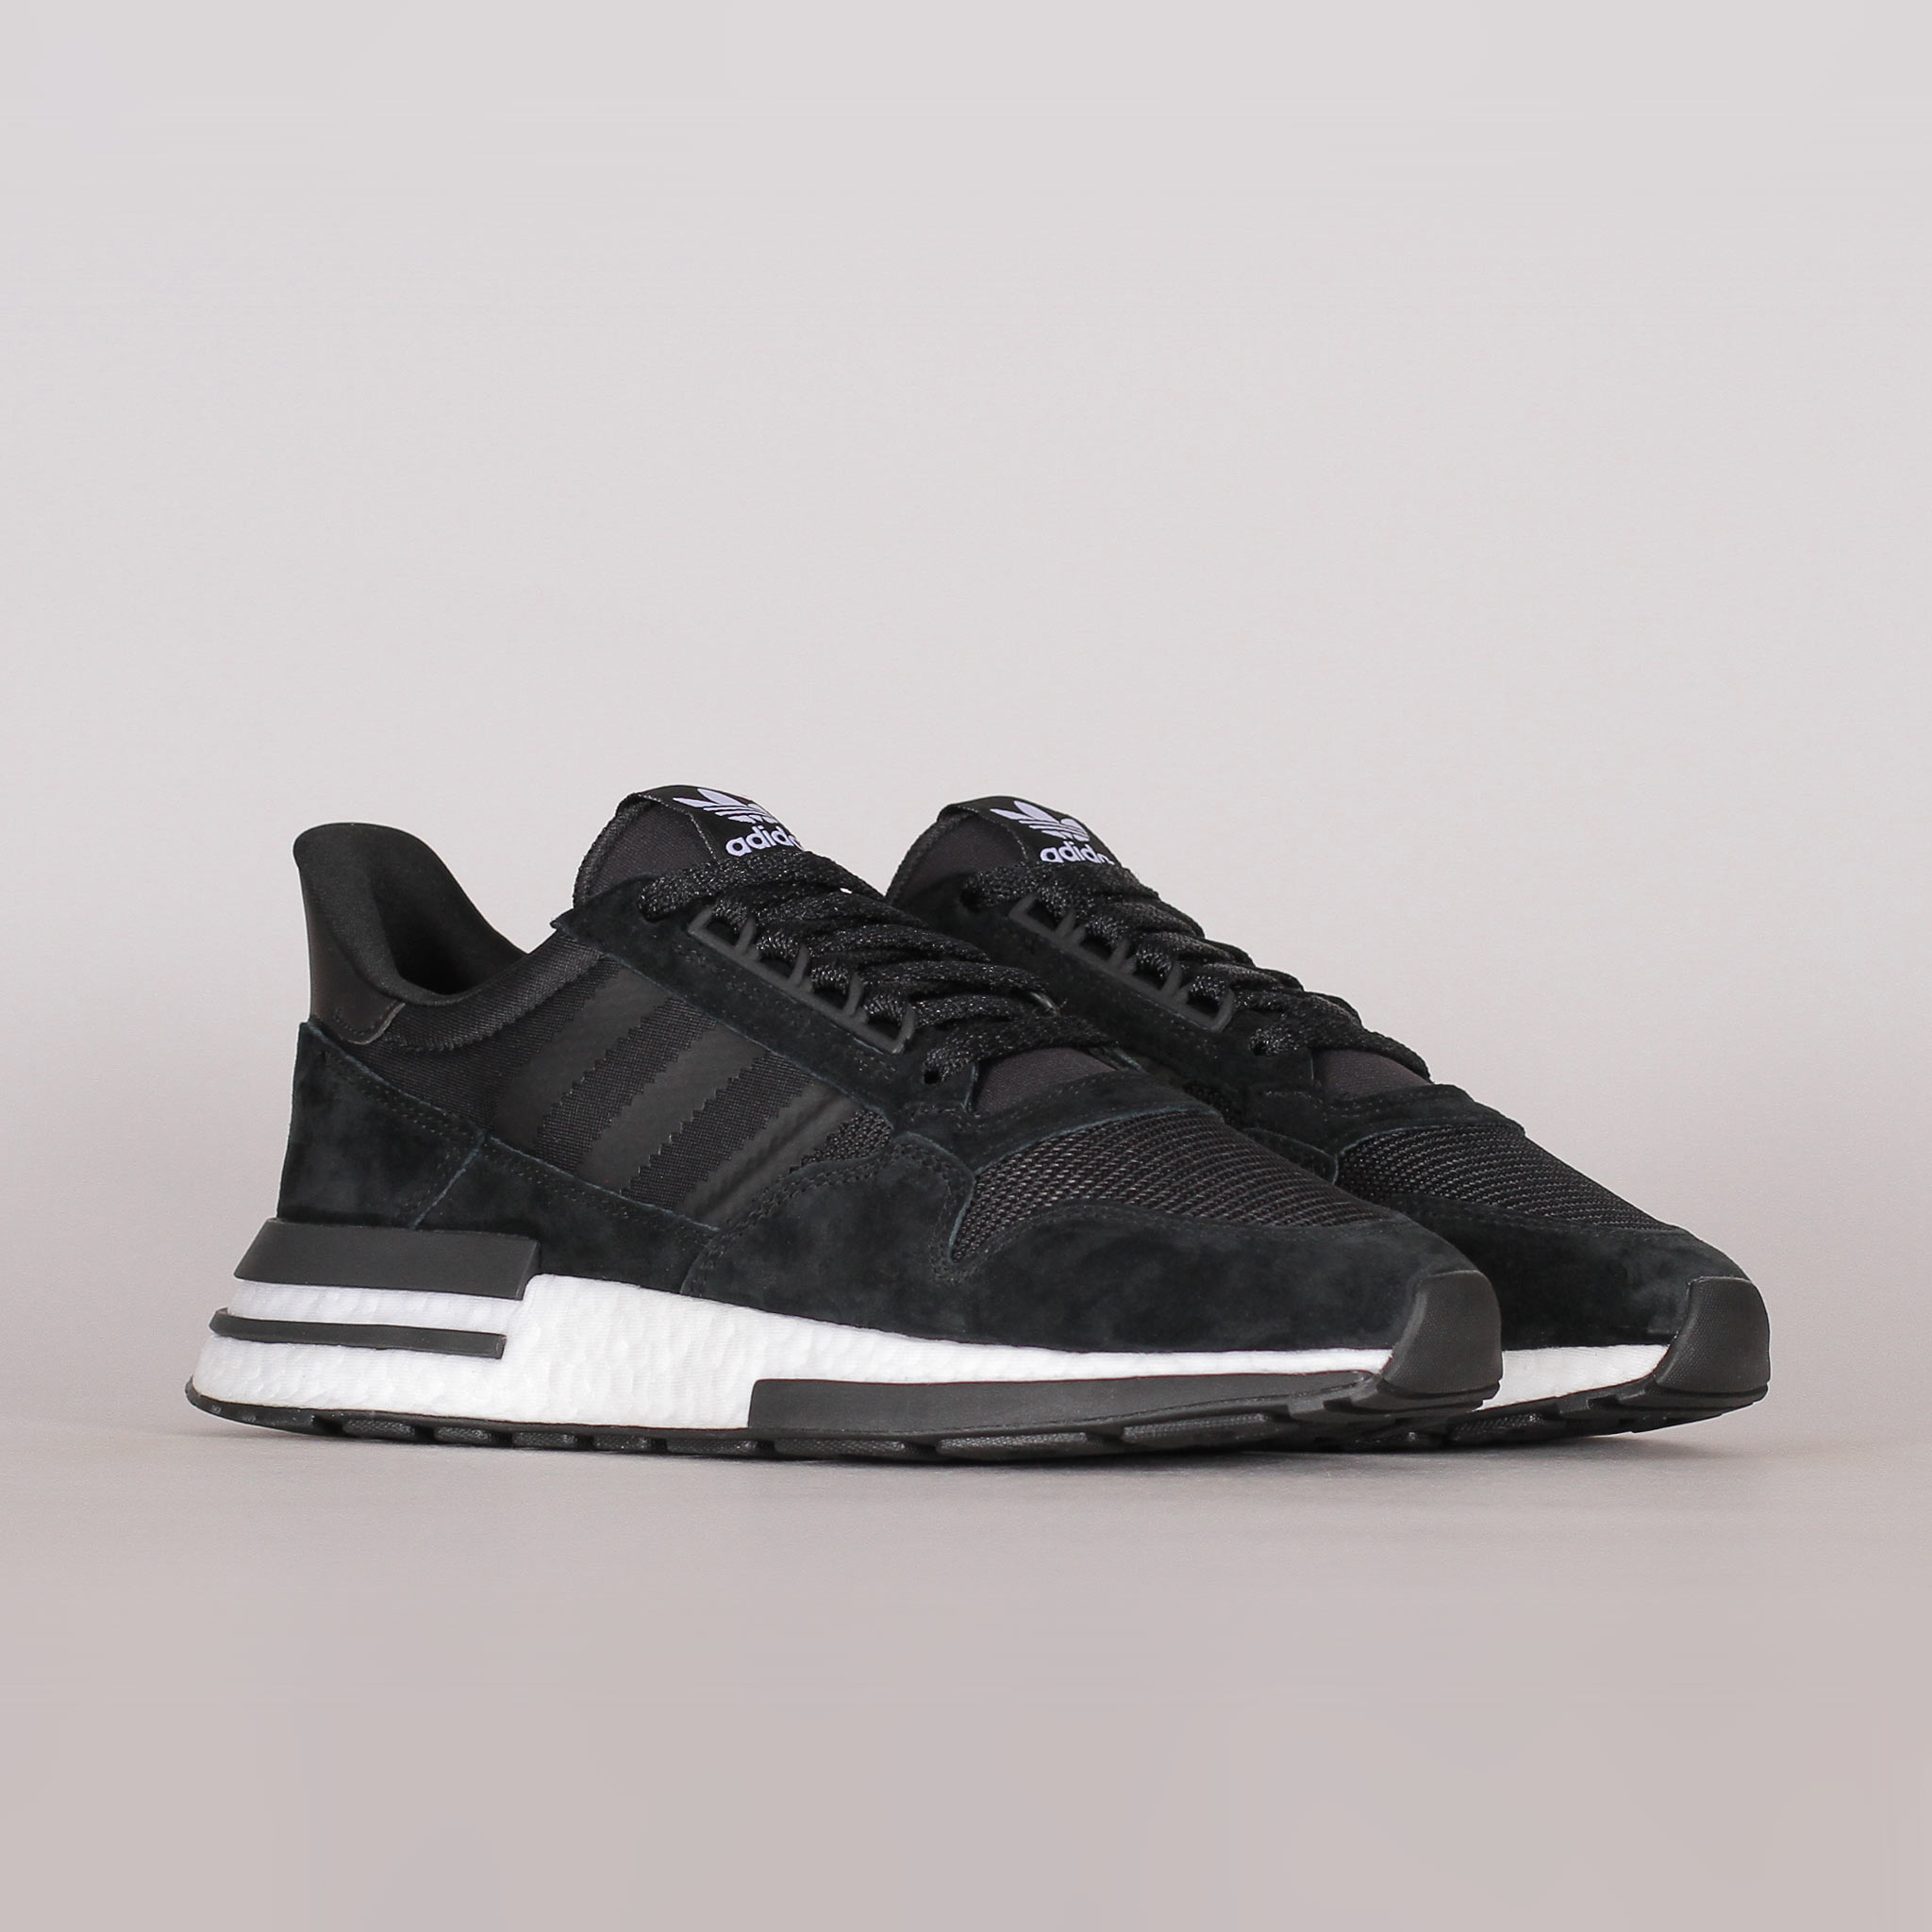 adidas zx 500 rm commonwealth fnf